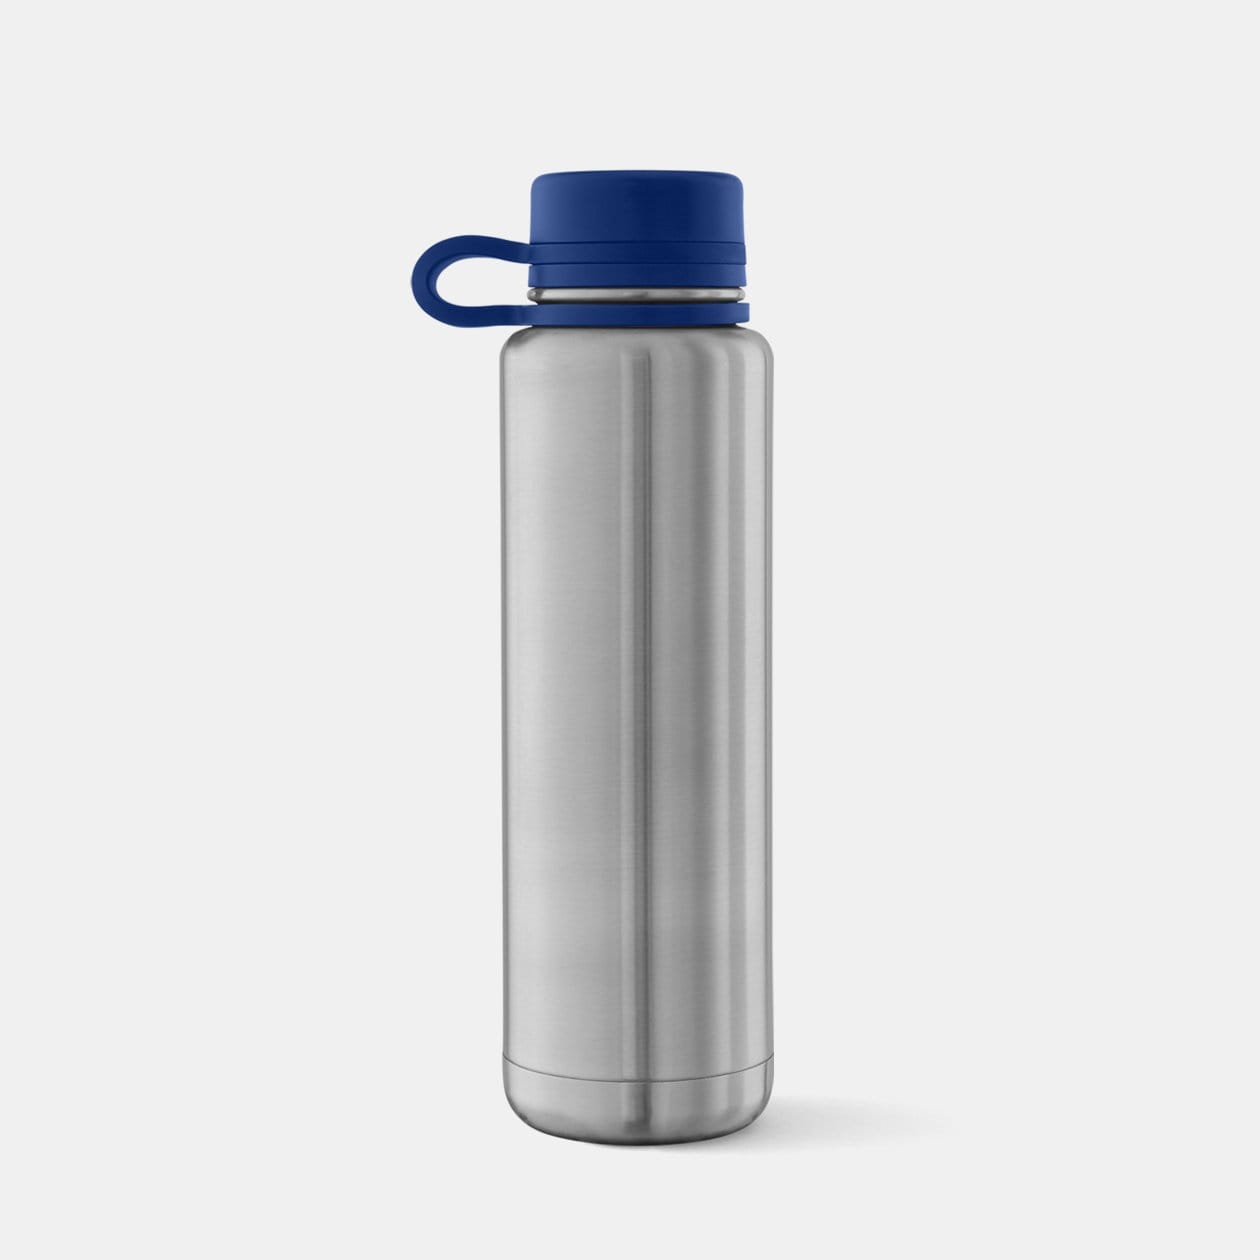 Davenport Stainless Steel Water Bottle 18 oz with Logo 